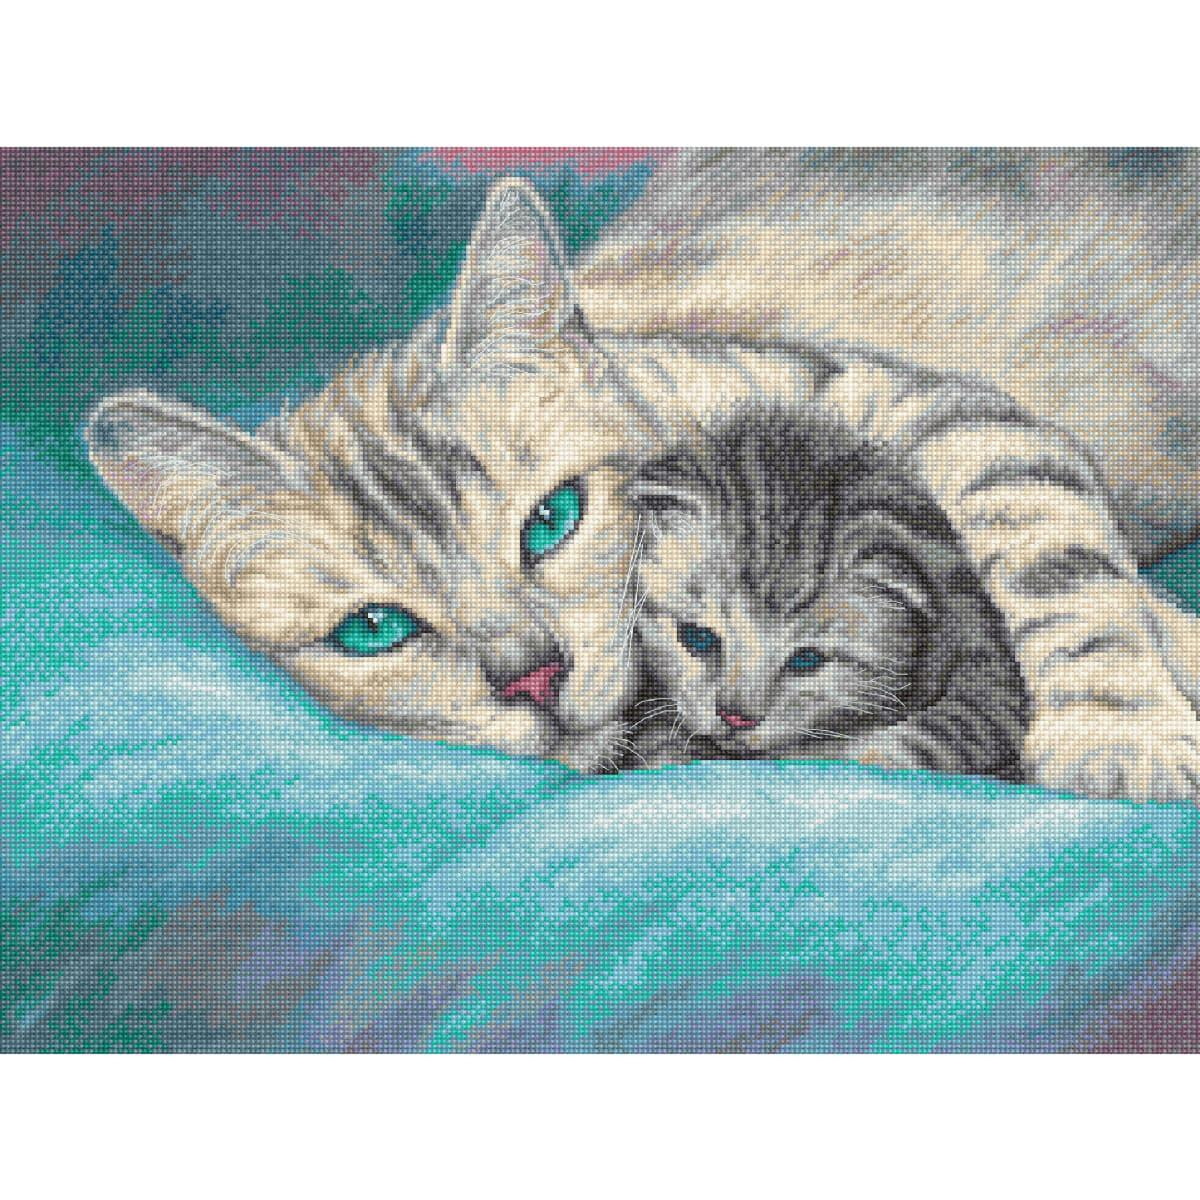 Letistitch counted cross stitch kit "Tucked...